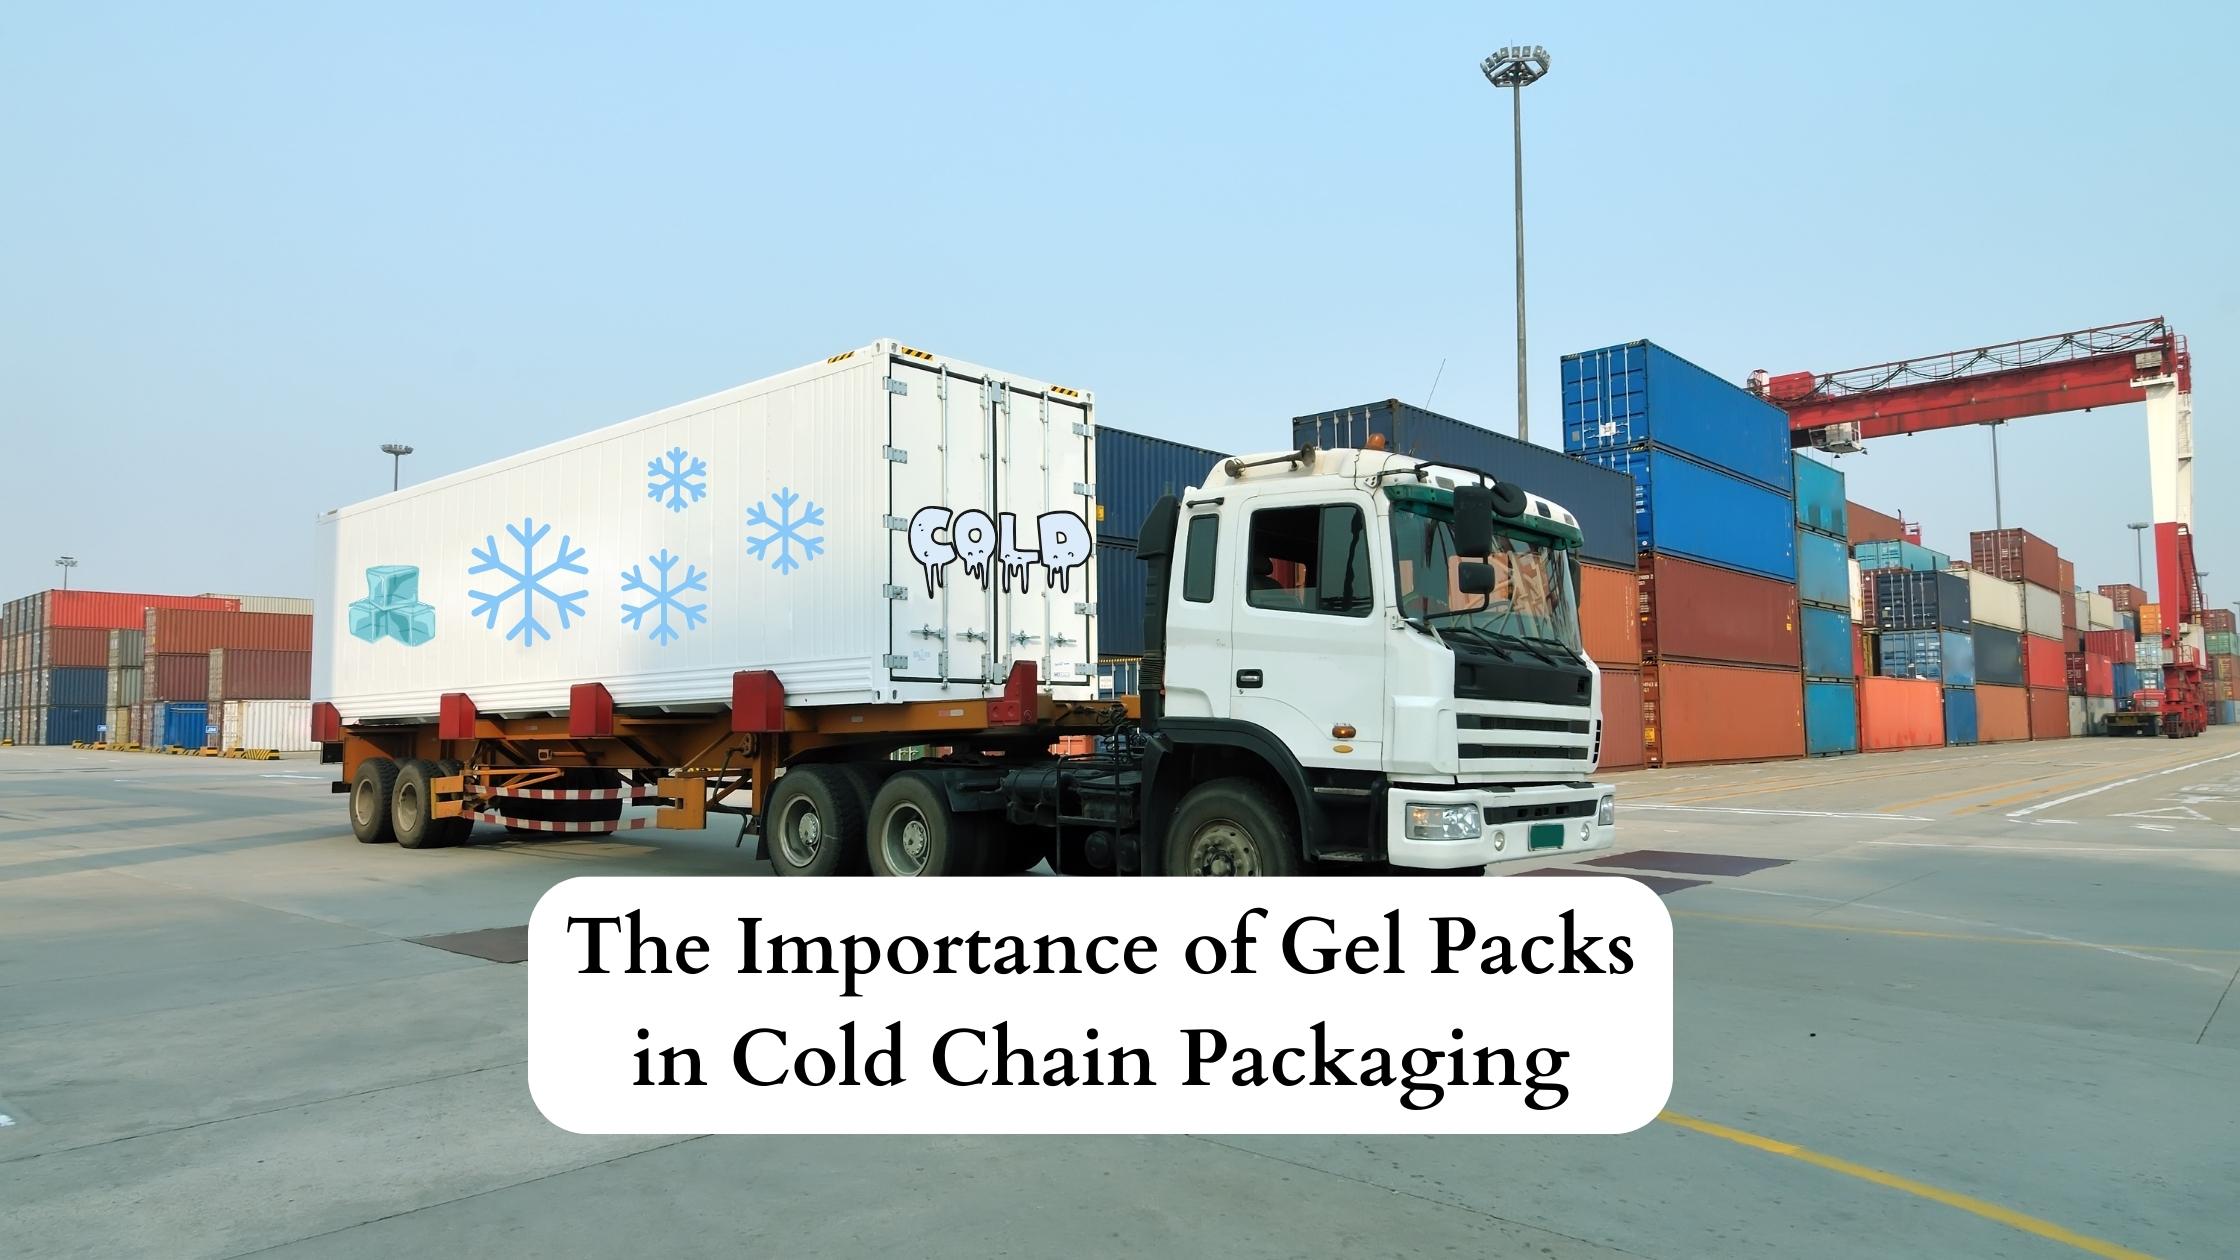 The importance of gel packs in cold chain packaging